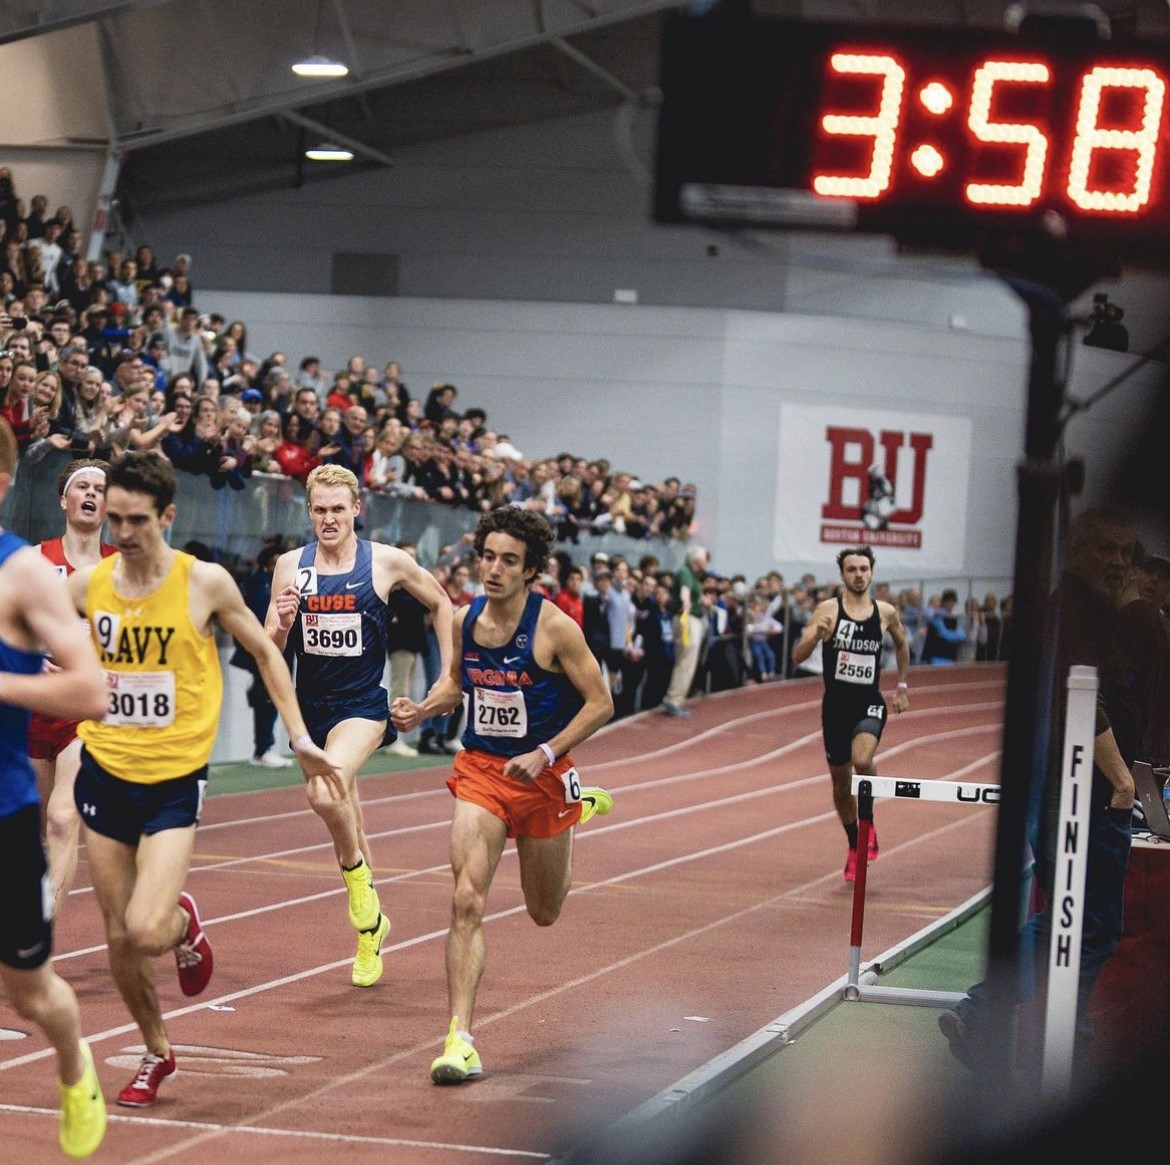 Karl Winter in Pursuit of a Sub-4:00 Mile